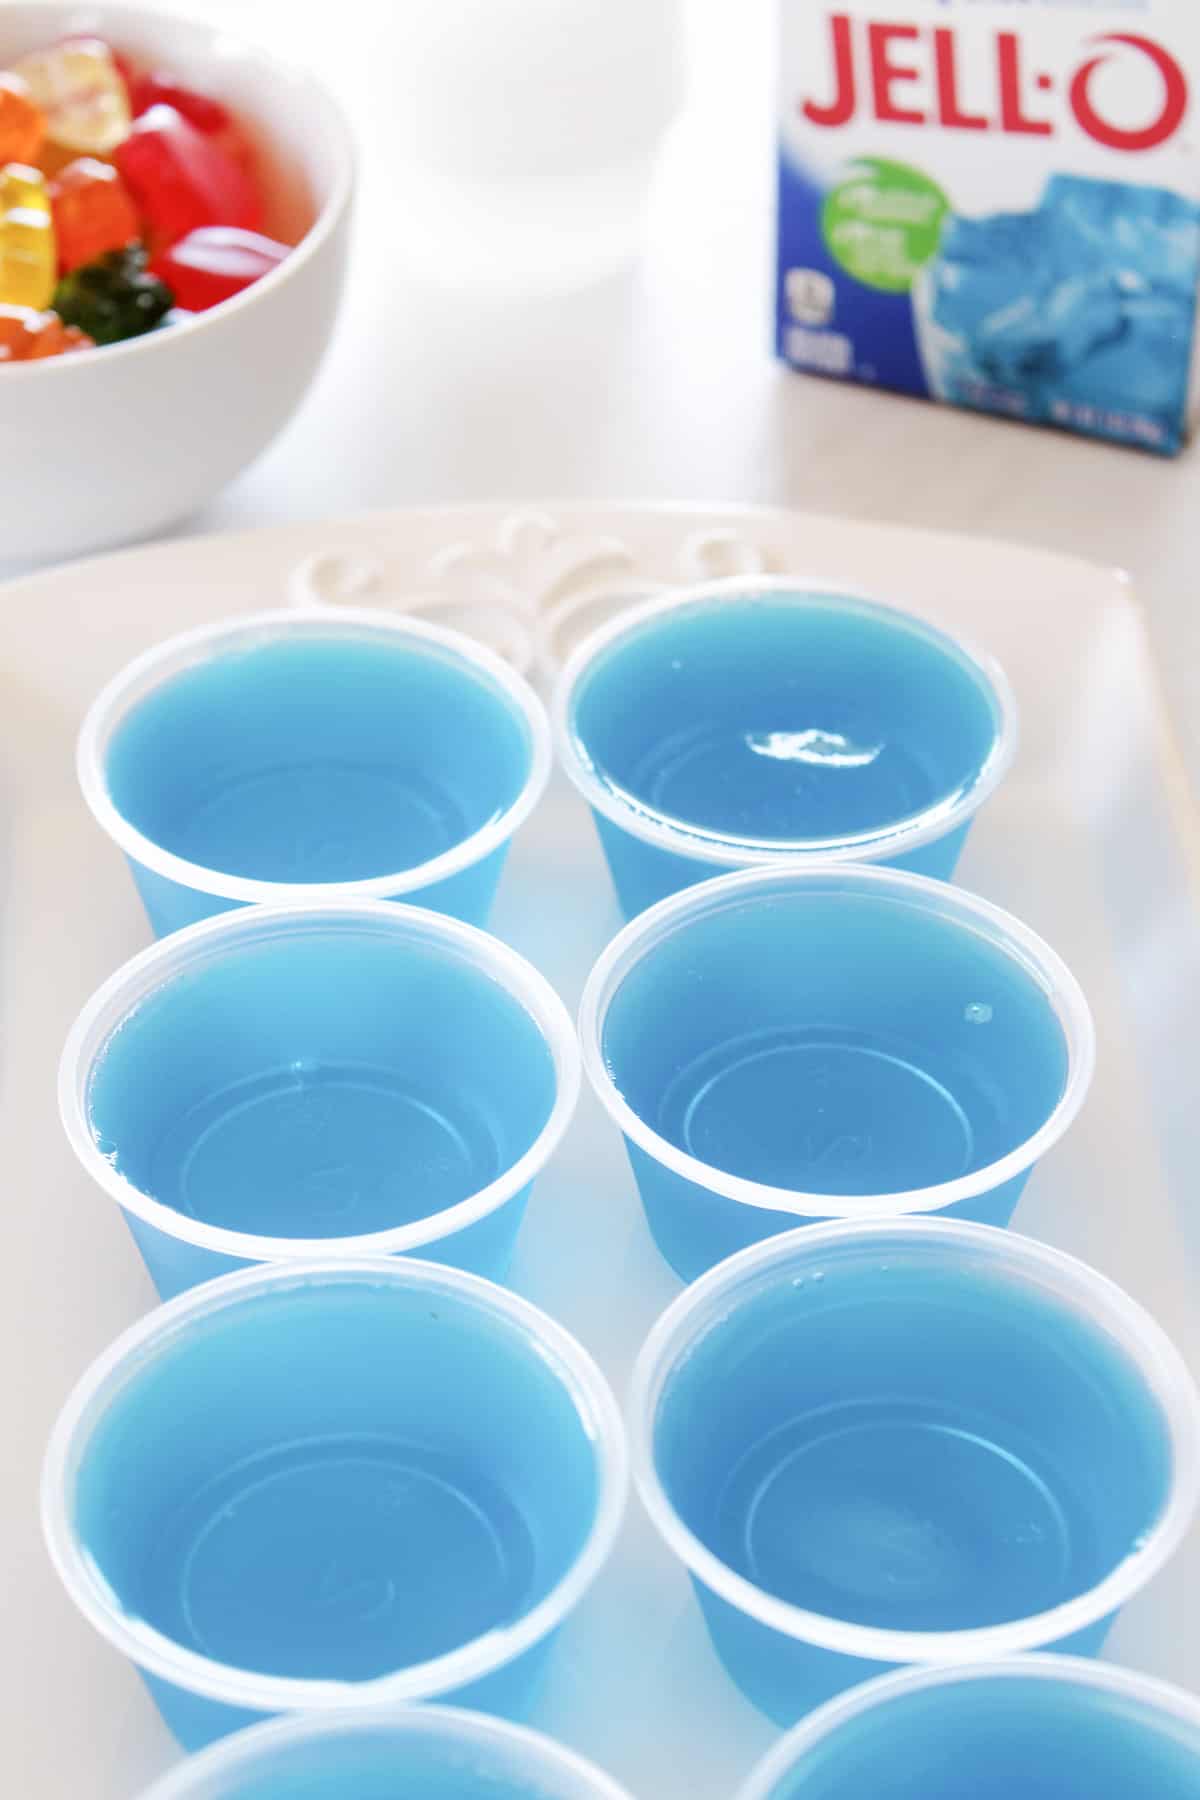 cups filled with jello